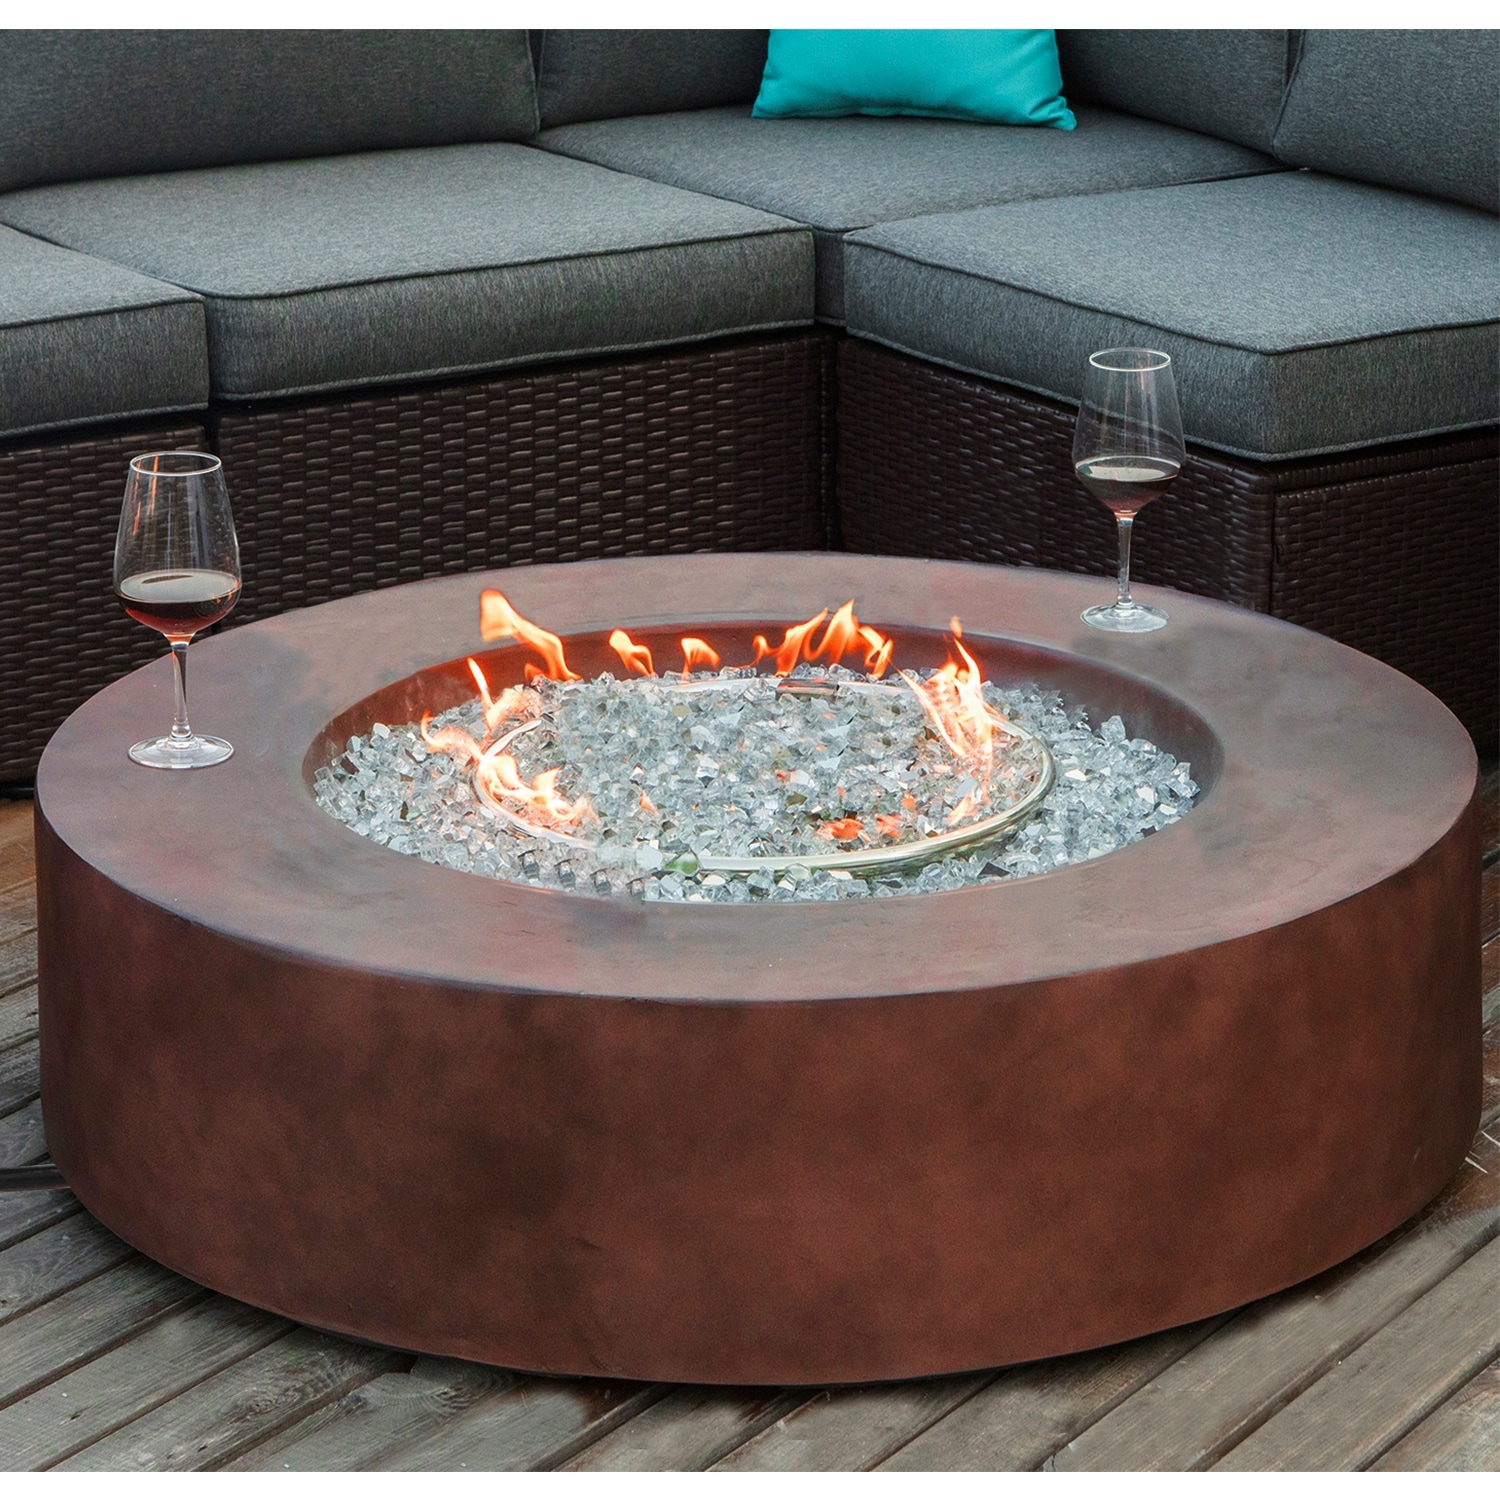 Cosiest Outdoor Propane Fire Pit Tank Outside On Sale Overstock 31500538